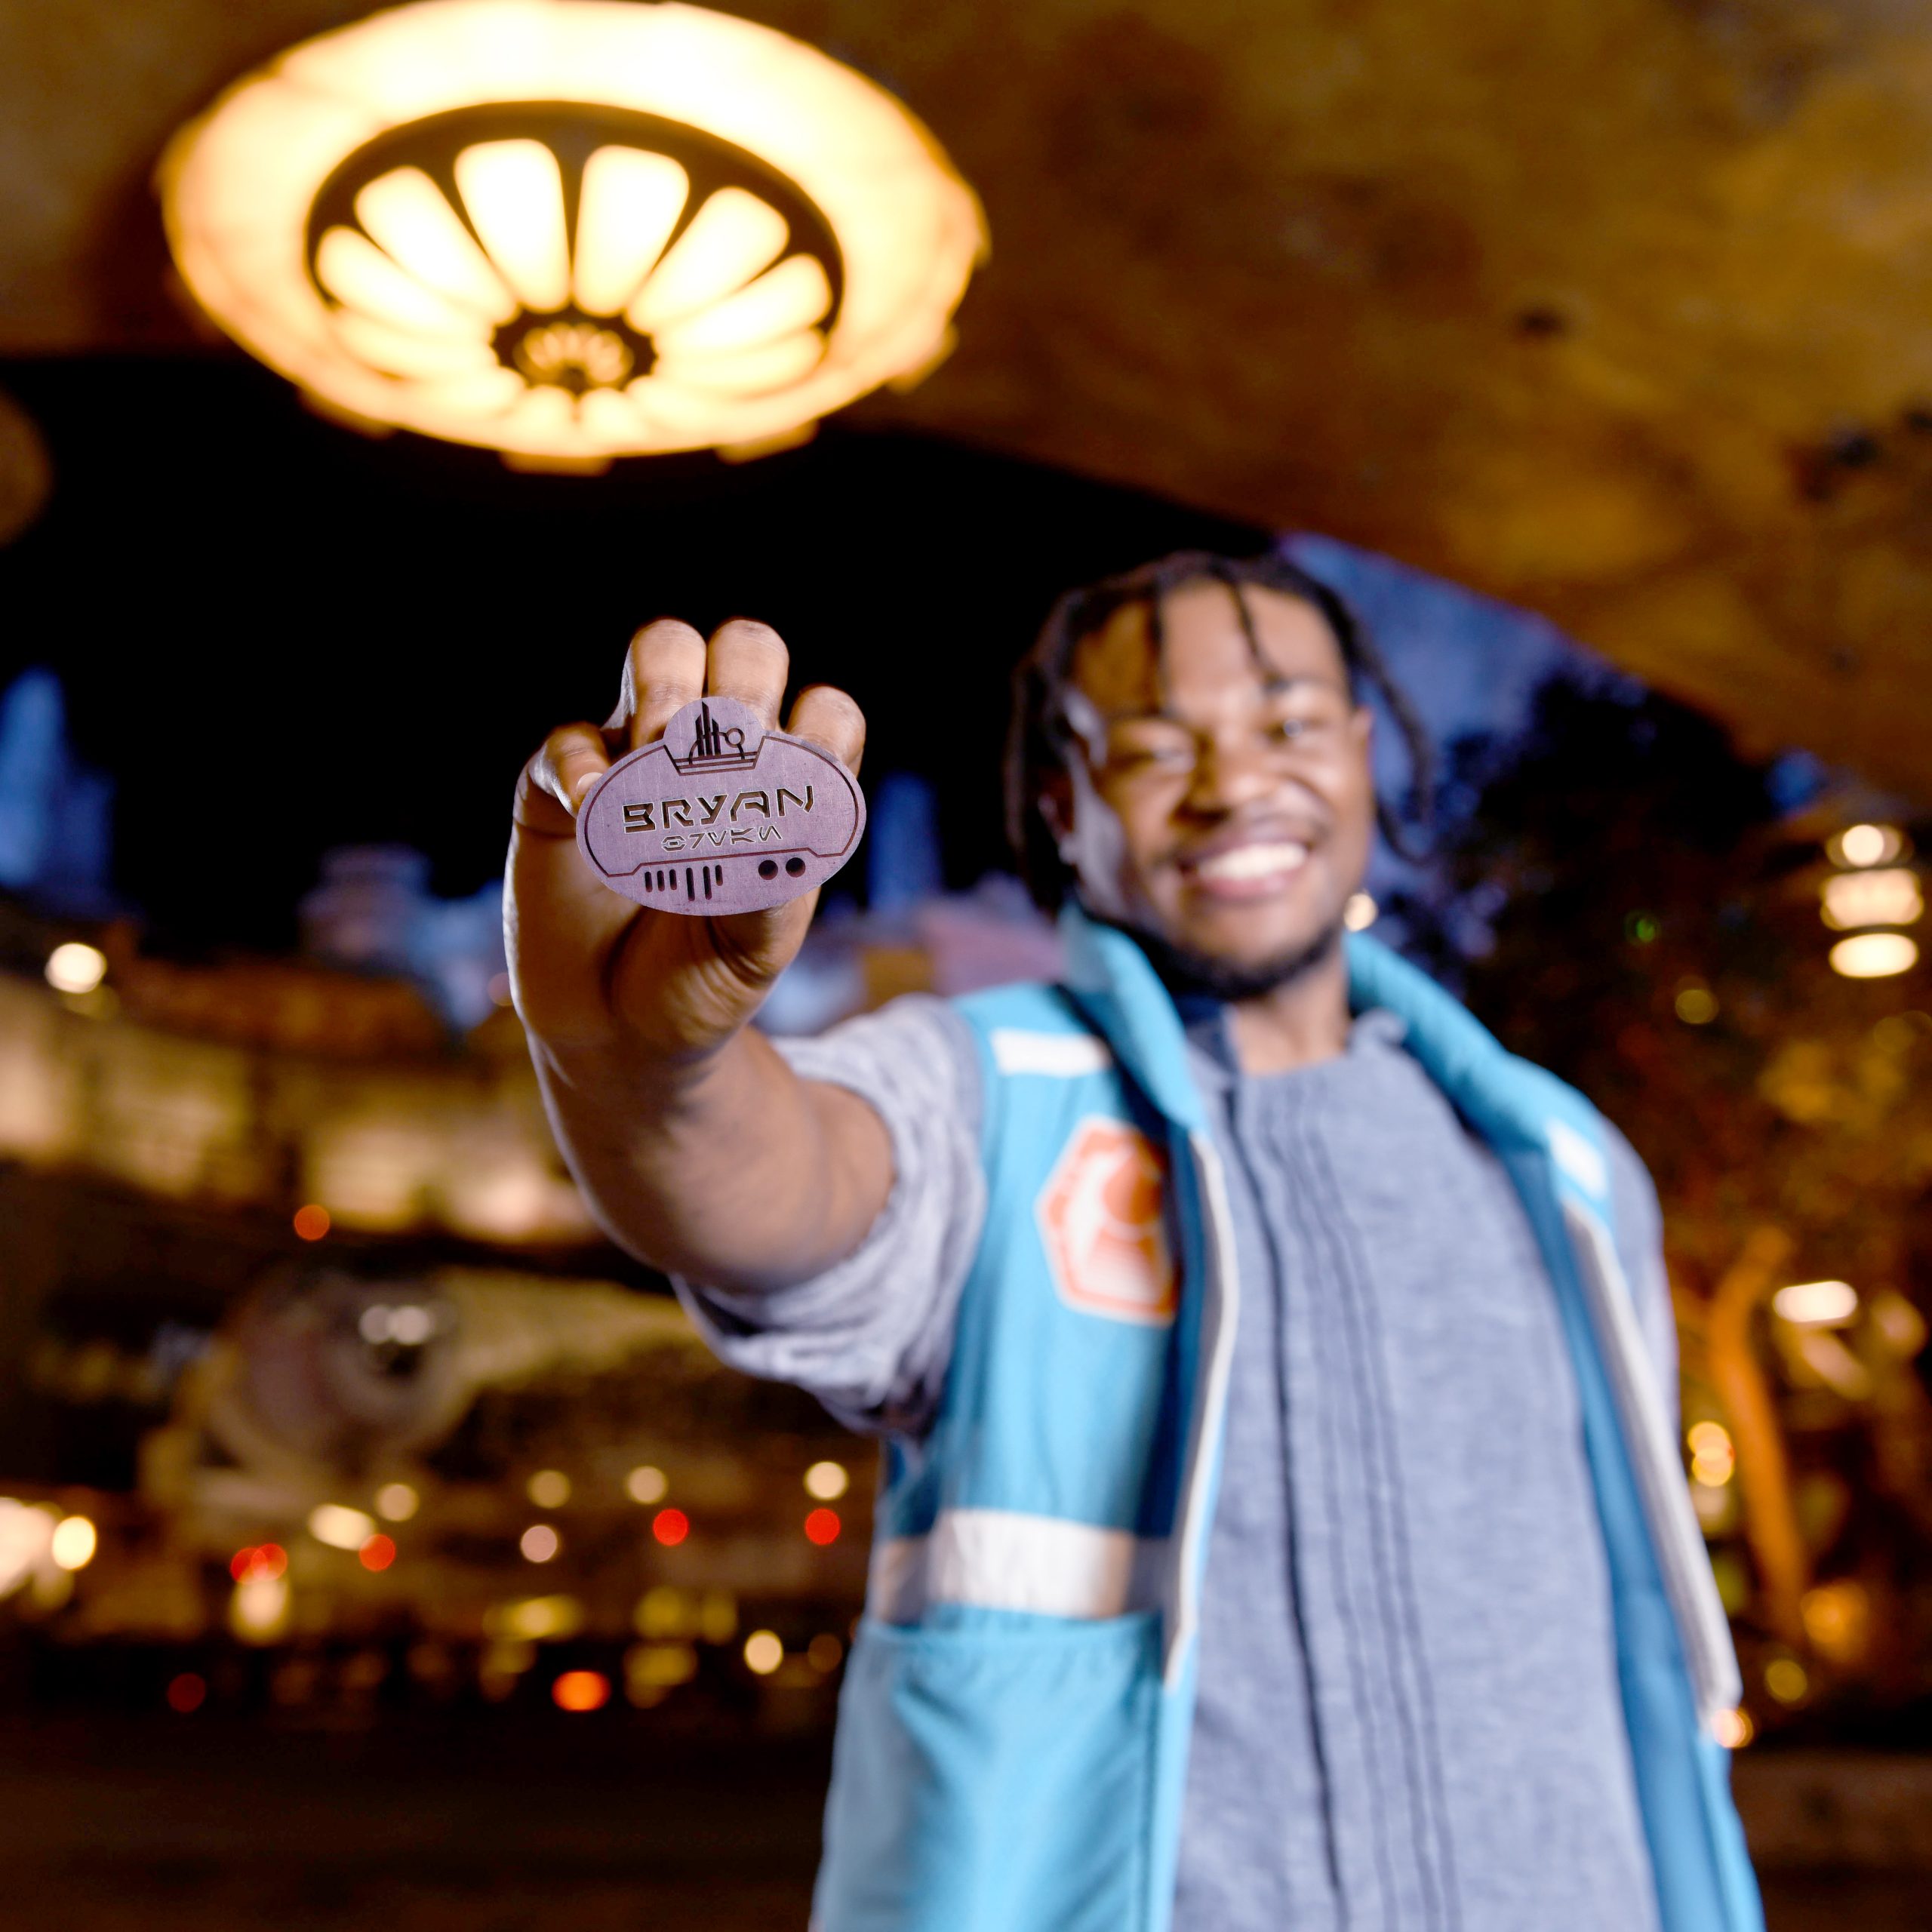 Male Disney College Program attractions participant smiling while holding his name badge forward towards the camera with Star Wars: Galaxy's Edge in the background